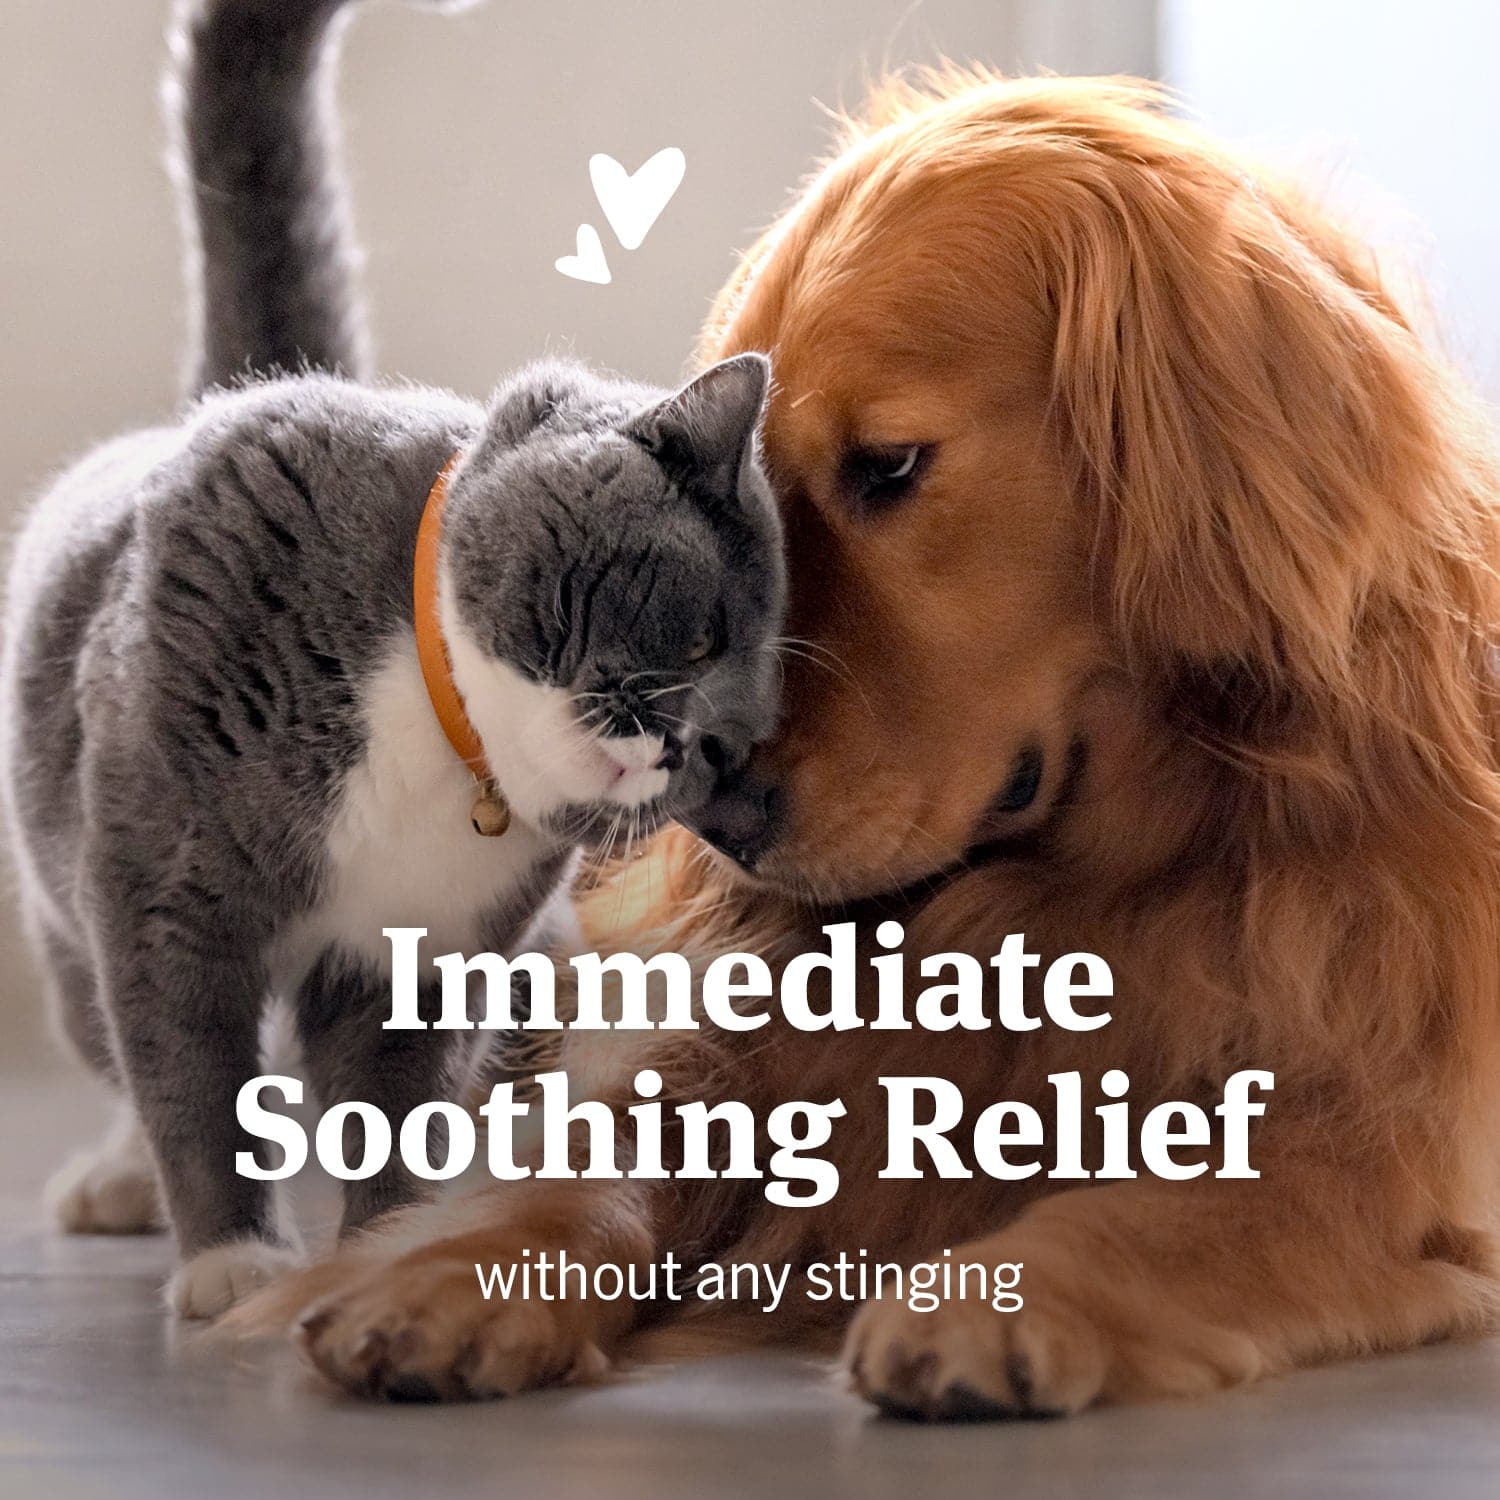 Immediate soothing relief